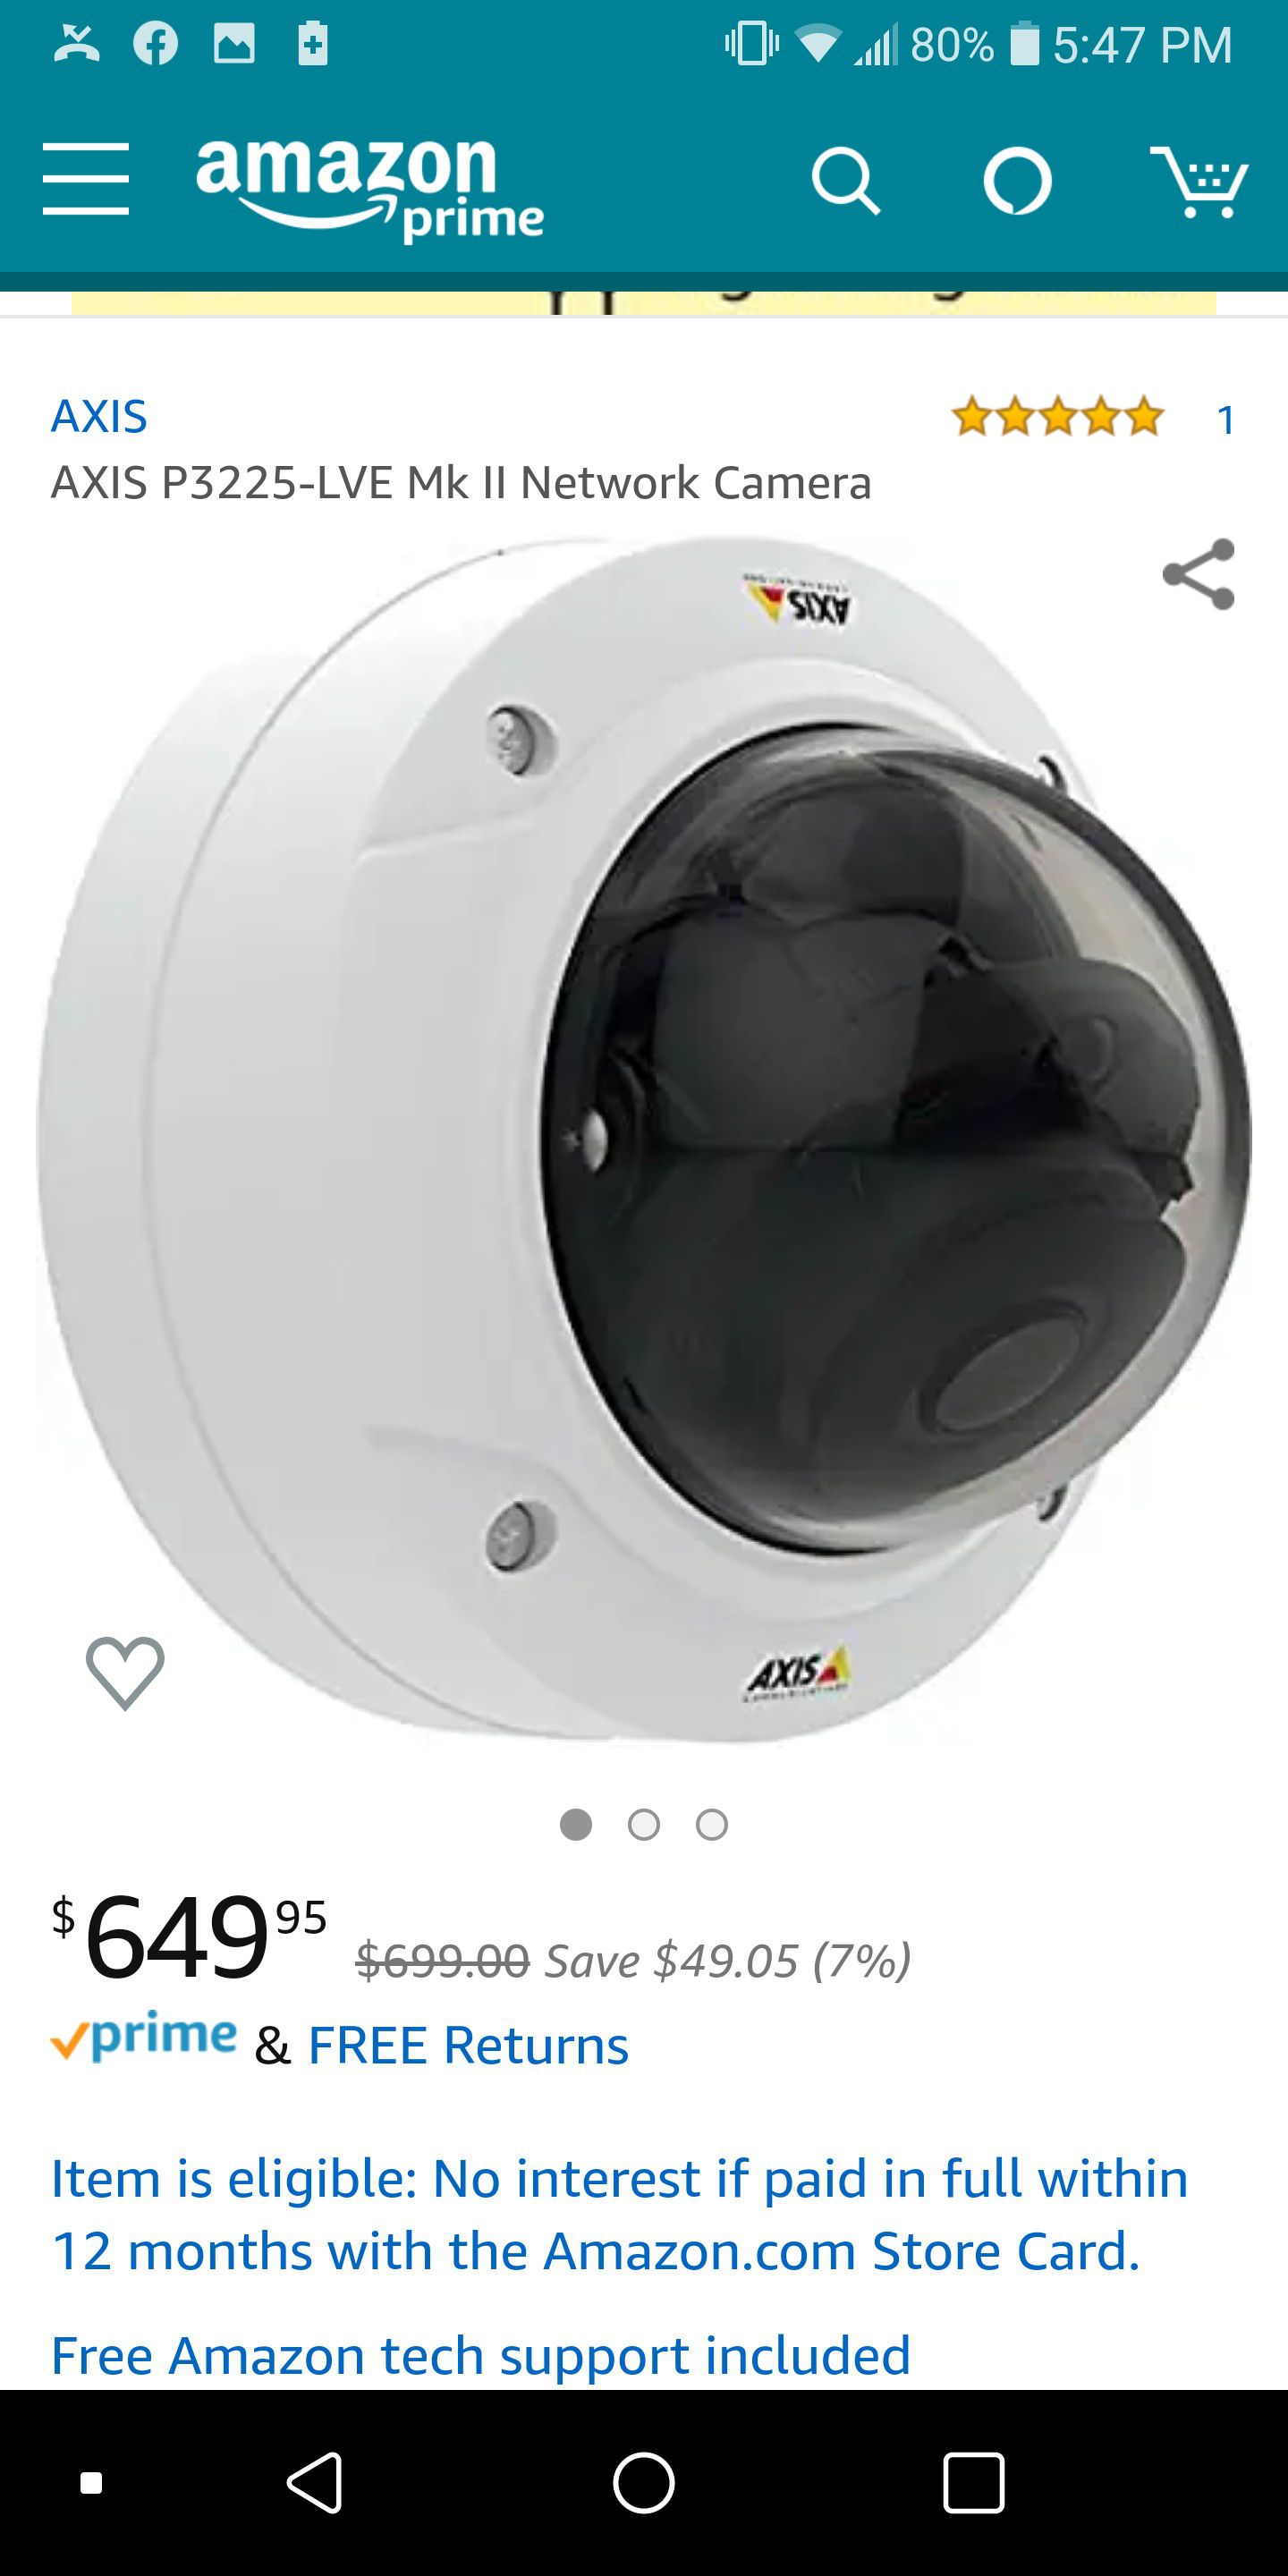 AXIS P3225-LVE MKII Network Camera